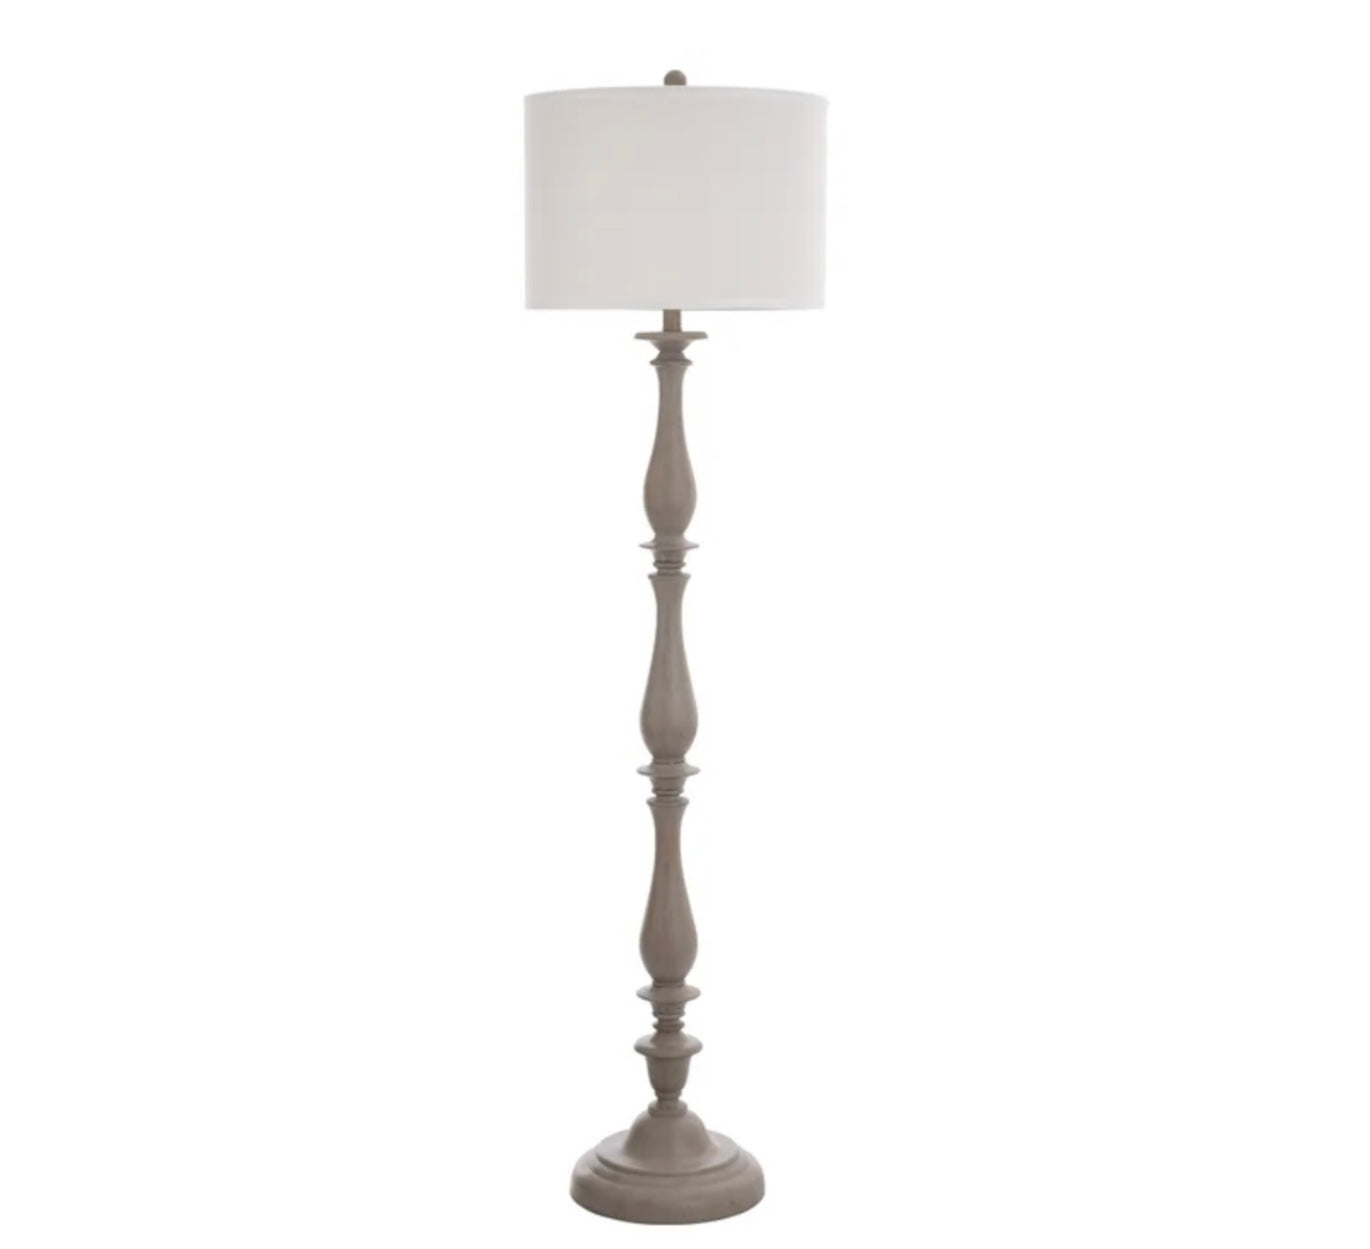 Traditional Classic Floor Lamp, Cool Gray